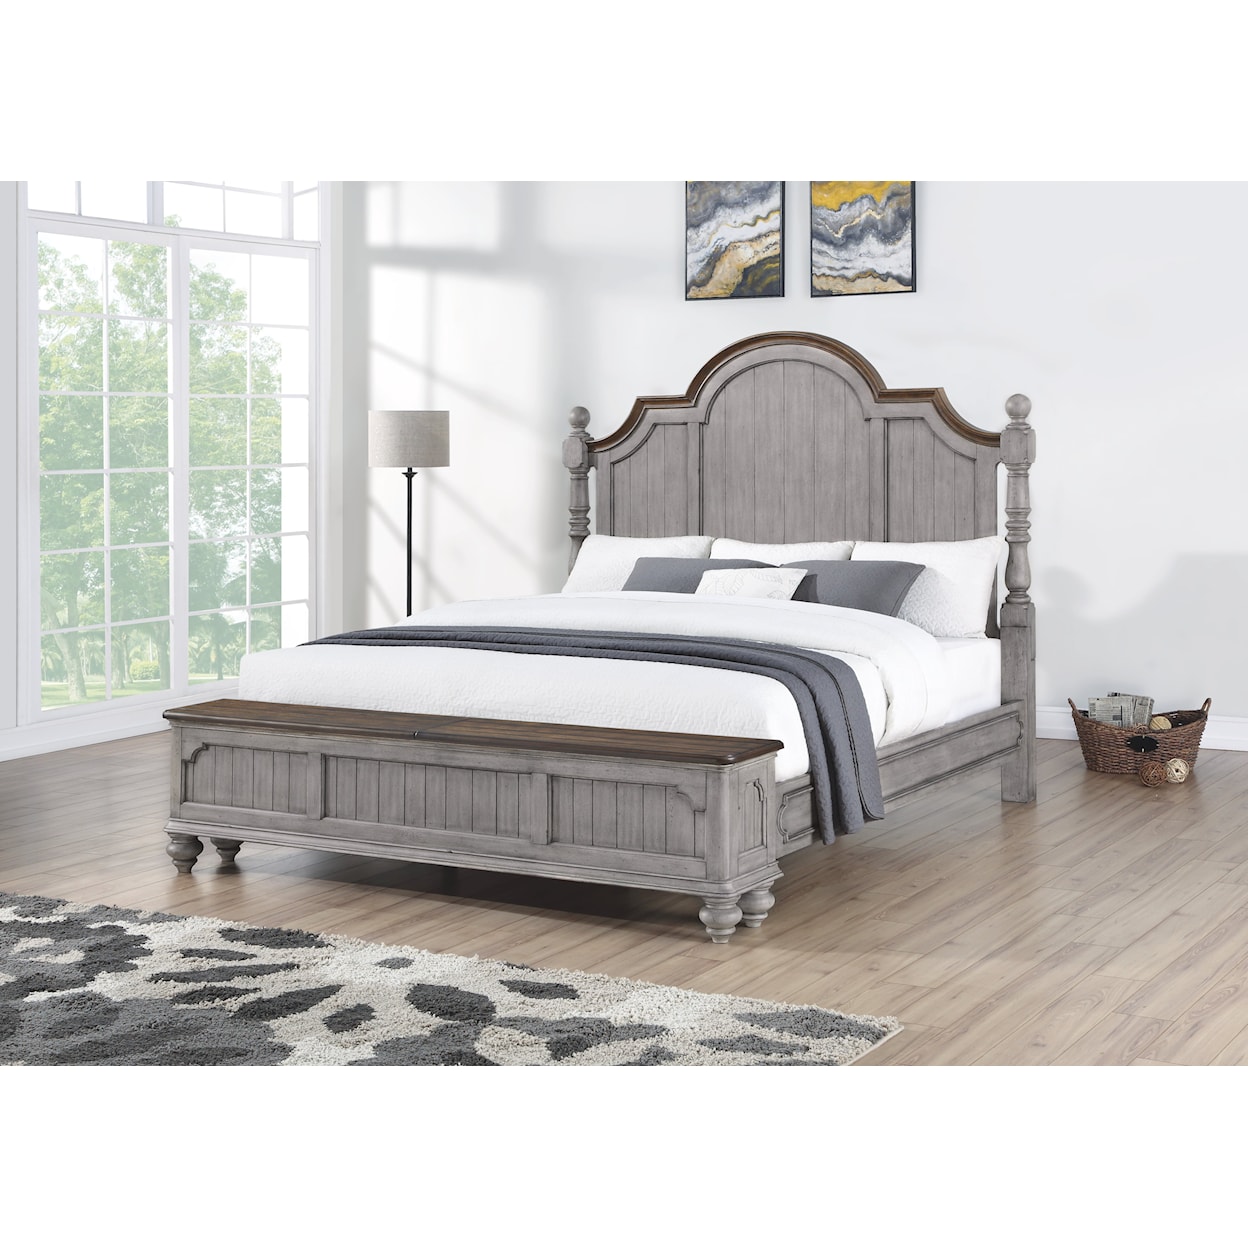 Wynwood, A Flexsteel Company Plymouth Queen Poster Storage Bed